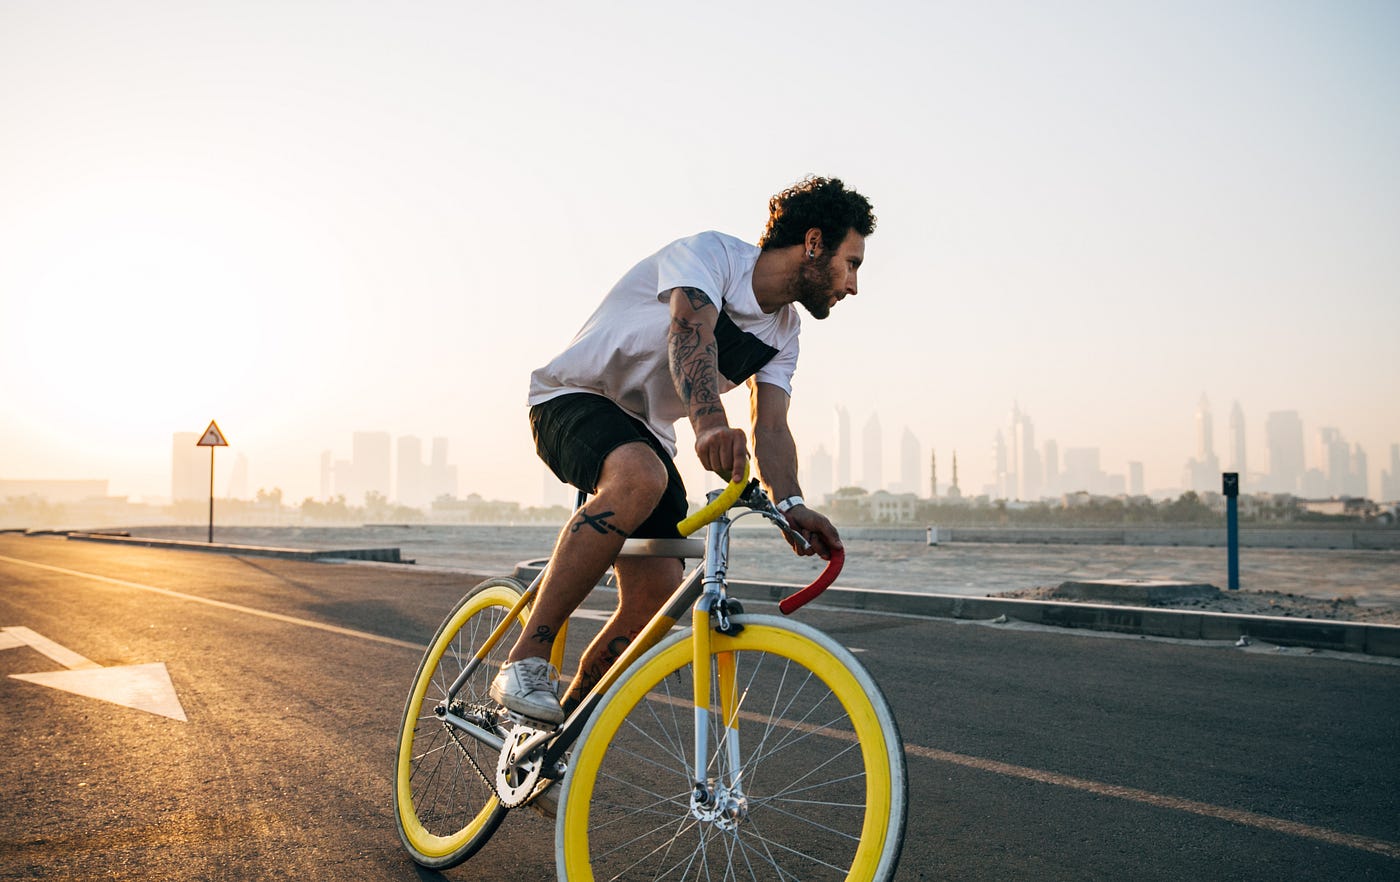 A man rides a rode bike with yellow-rimmed wheels. Cardio can also help to increase your metabolism, which is how your body burns calories at rest. A higher metabolism means you will burn more calories even when not exercising